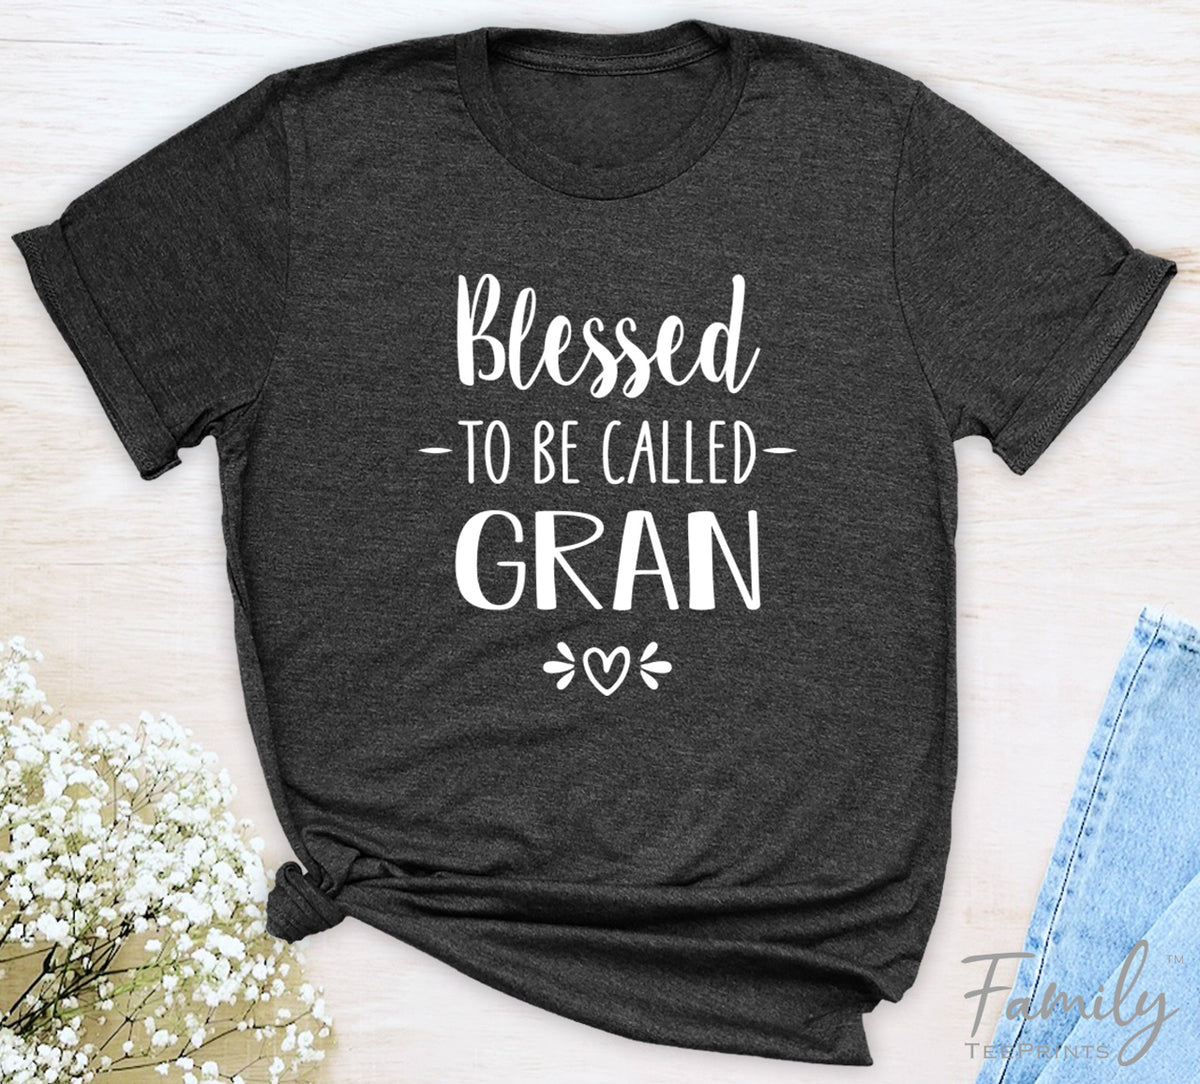 Blessed To Be Called Gran - Unisex T-shirt - Gran Shirt - Gift For New Gran - familyteeprints